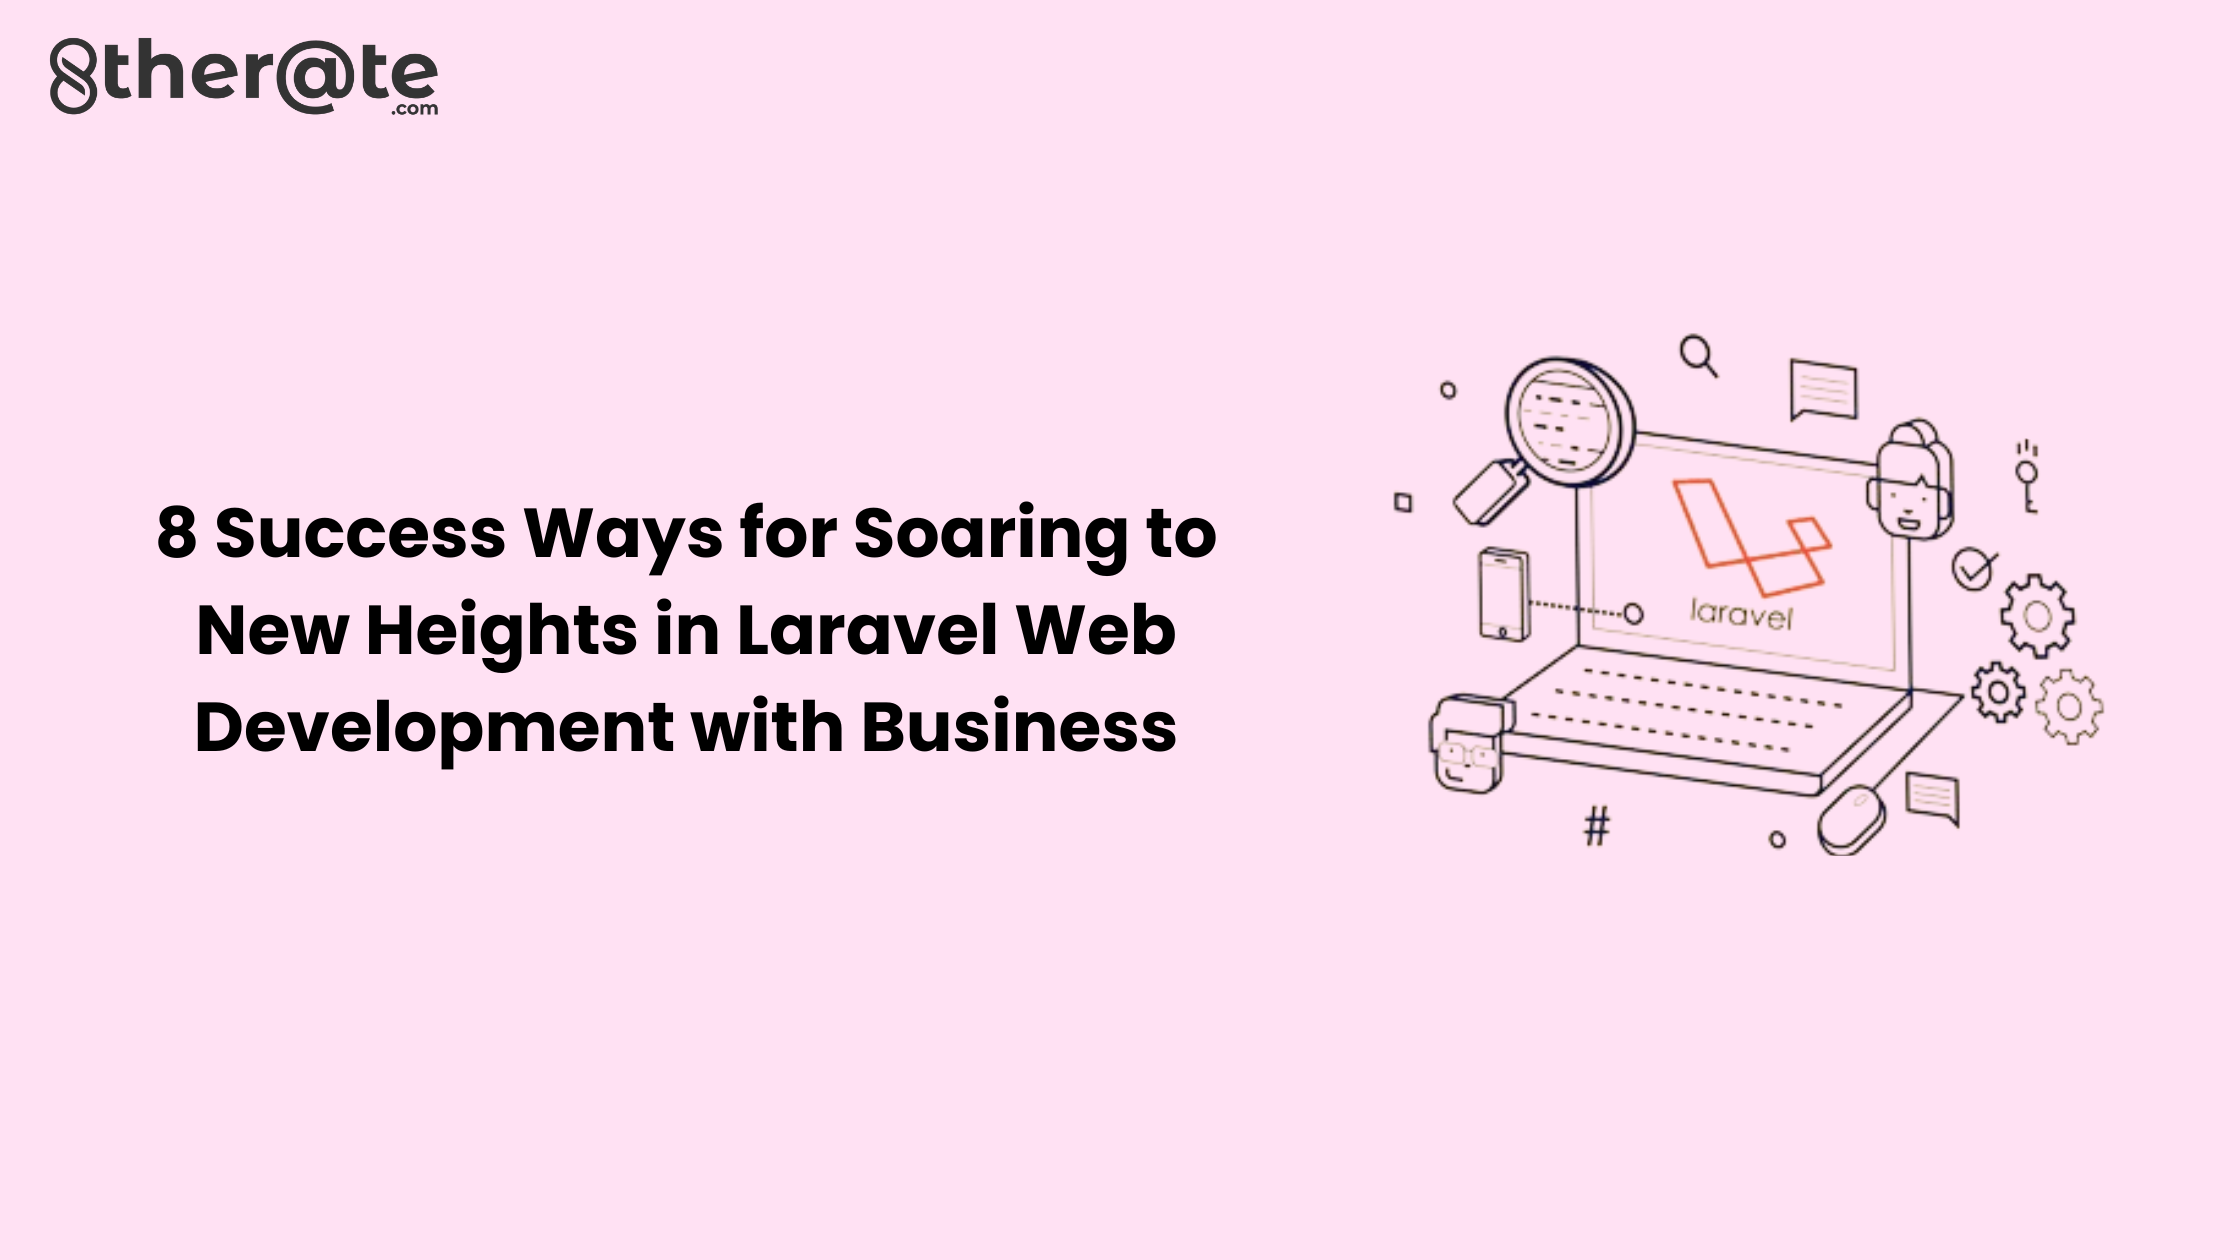 8 Success Ways for Soaring to New Heights in Laravel Web Development with Business